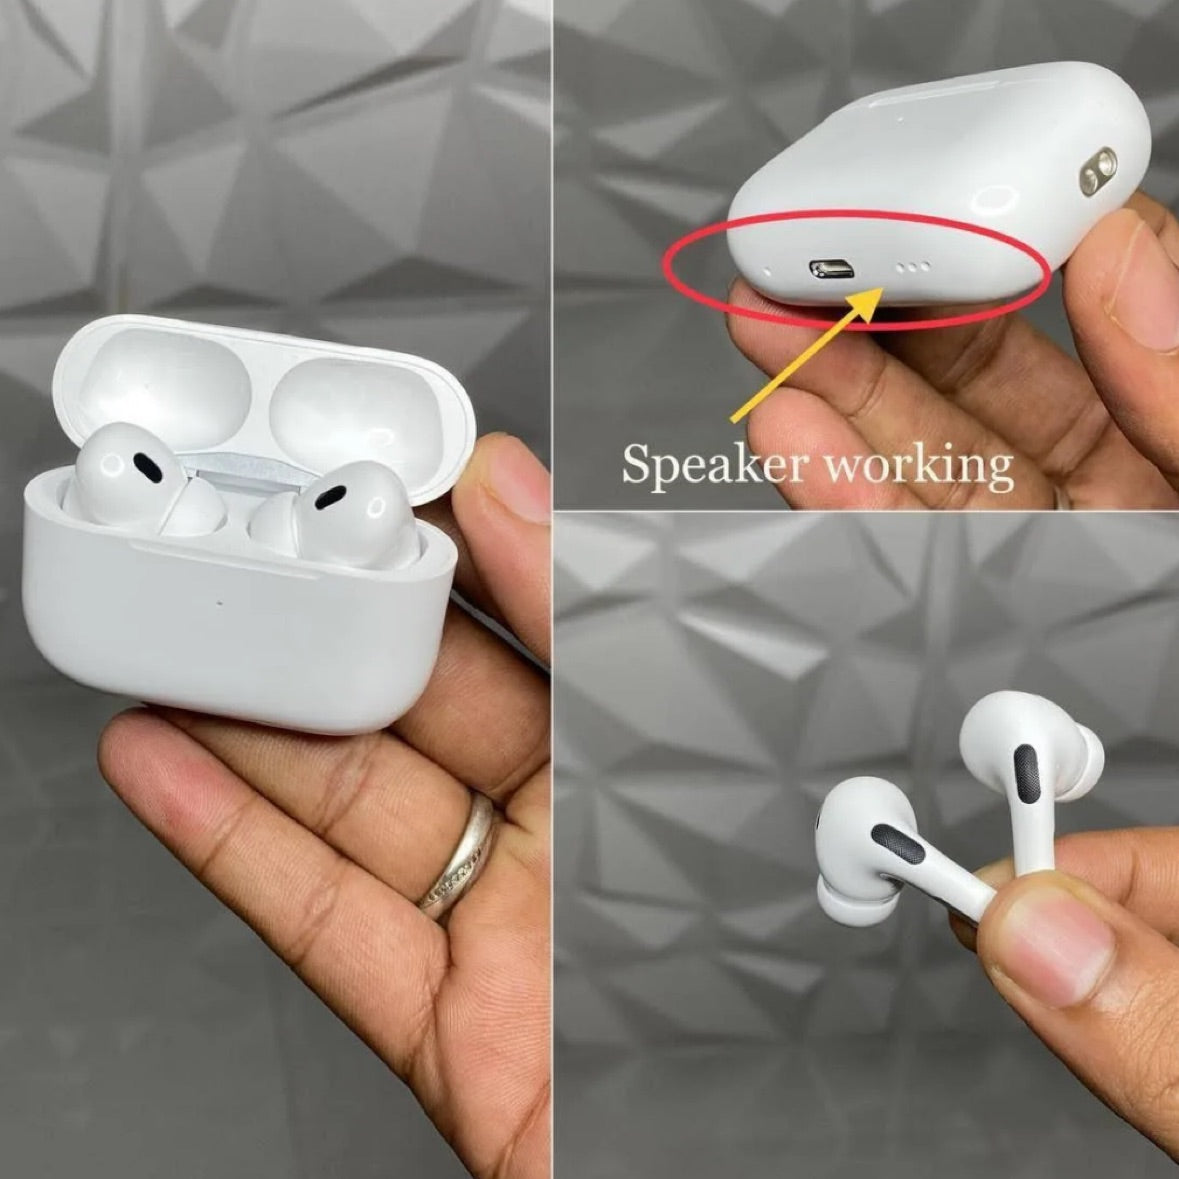 Airpods pro 2 Clone with all iOS features working - Compatible with all iPhones and Android Phones! Best Air pods Pro 2 Clone